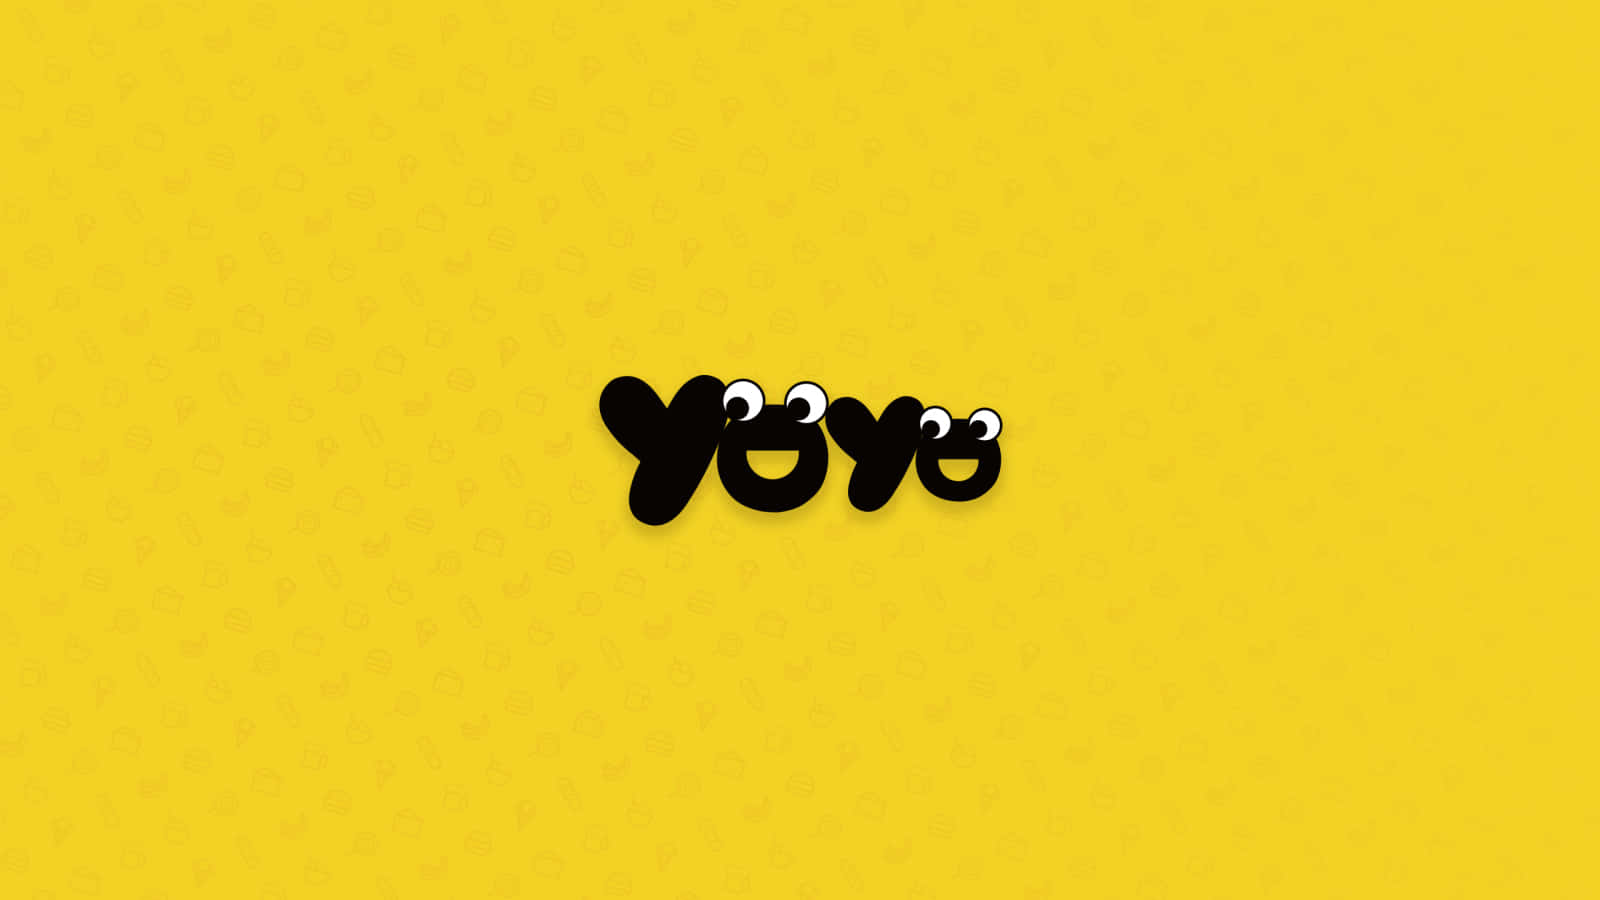 A Yellow Background With The Word Yoyo On It Wallpaper